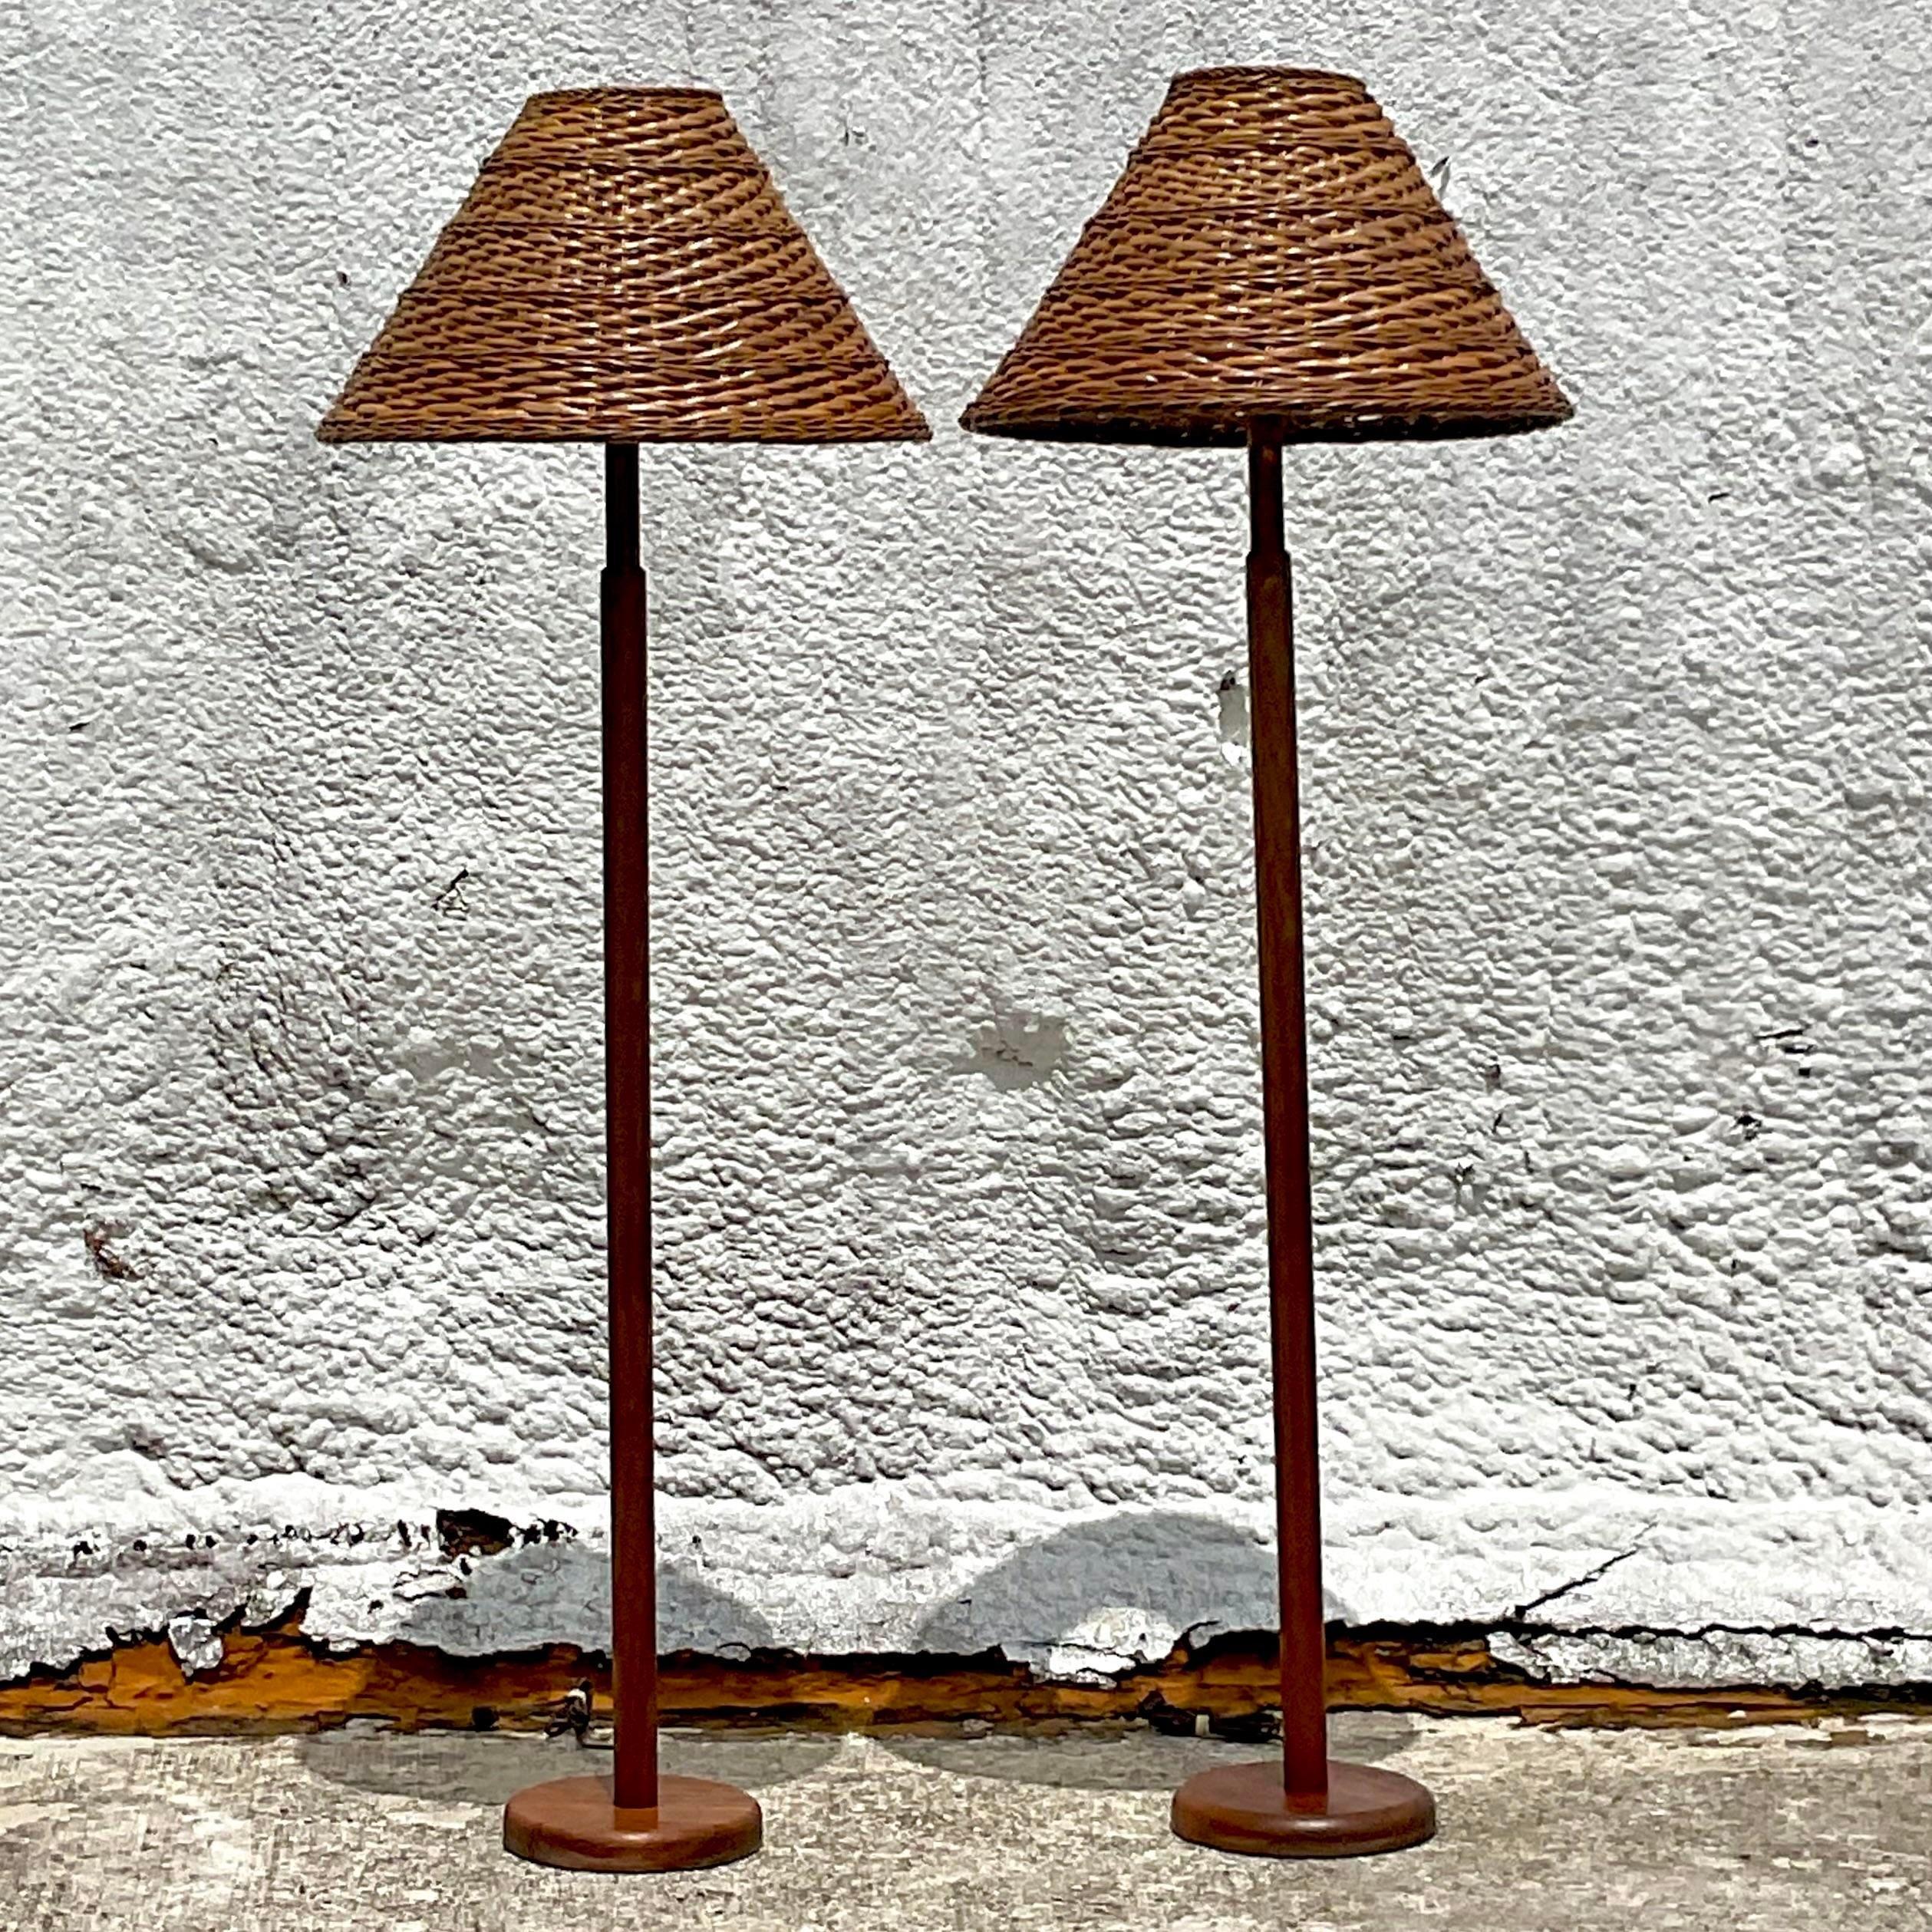 American Vintage Late 20th Century Teak Floor Lamps With Woven Rattan Shades - a Pair